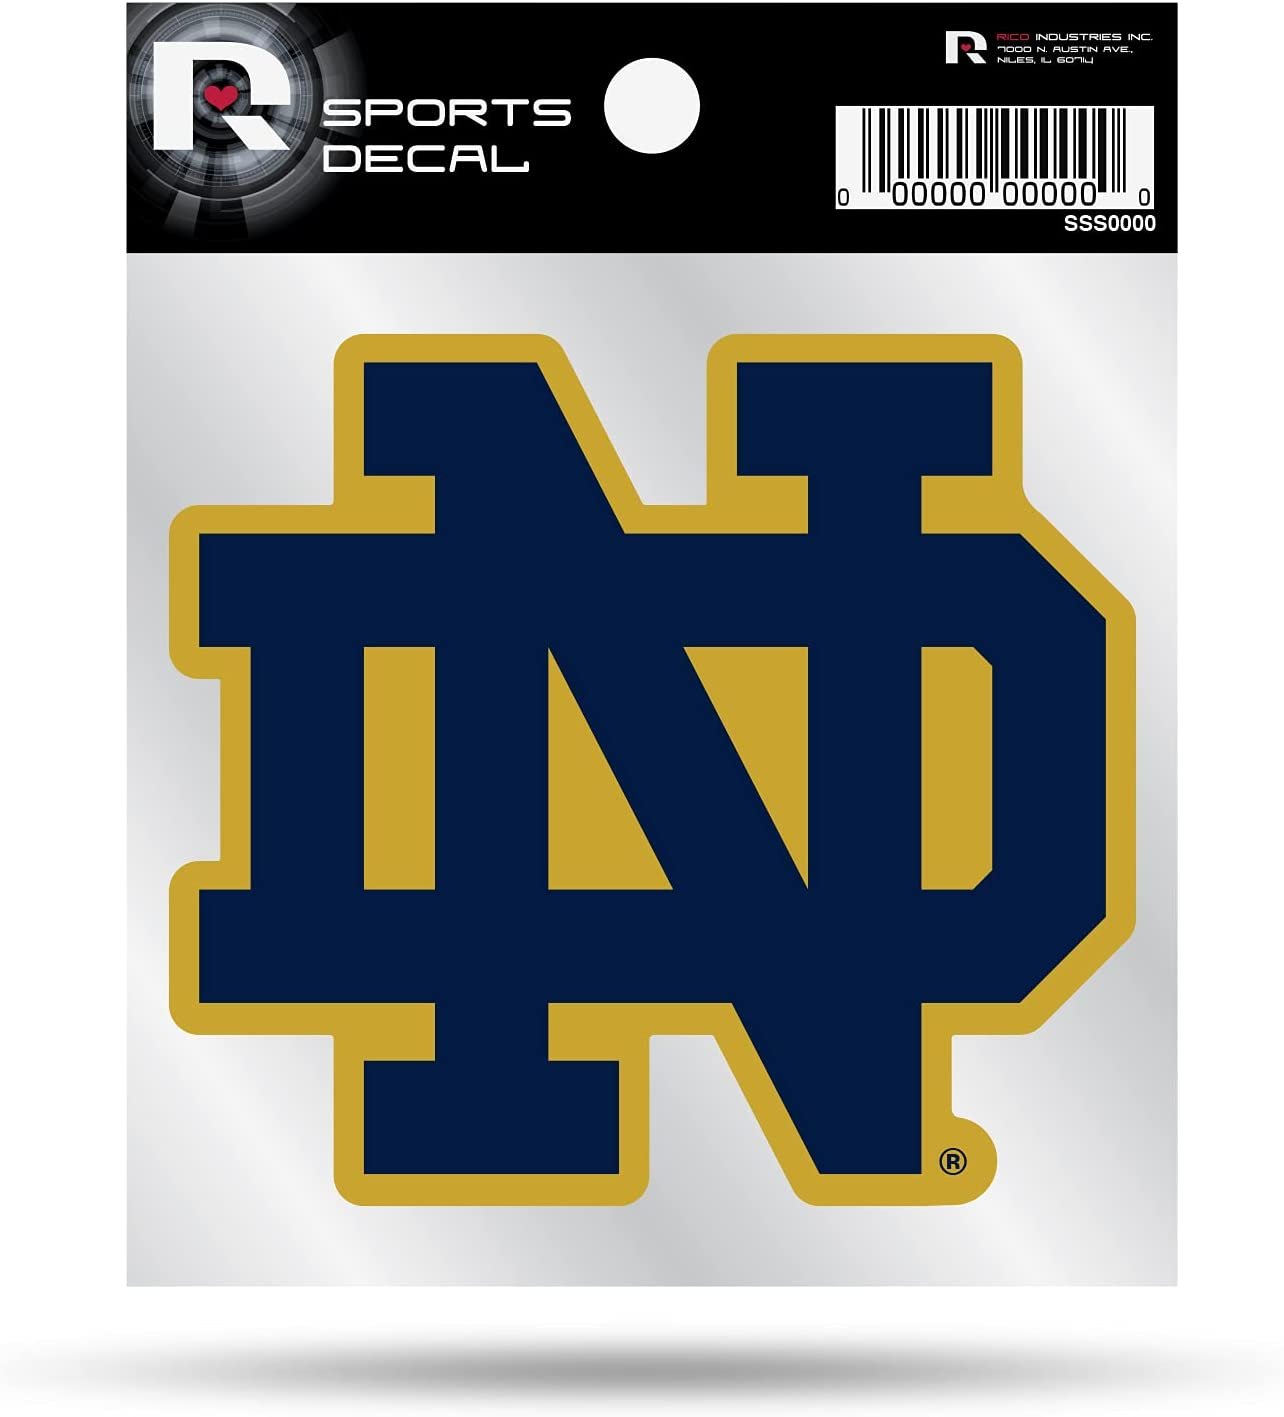 University of Notre Dame Fightning Irish 4x4 Inch Decal Sticker ND Logo Design Clear Backing